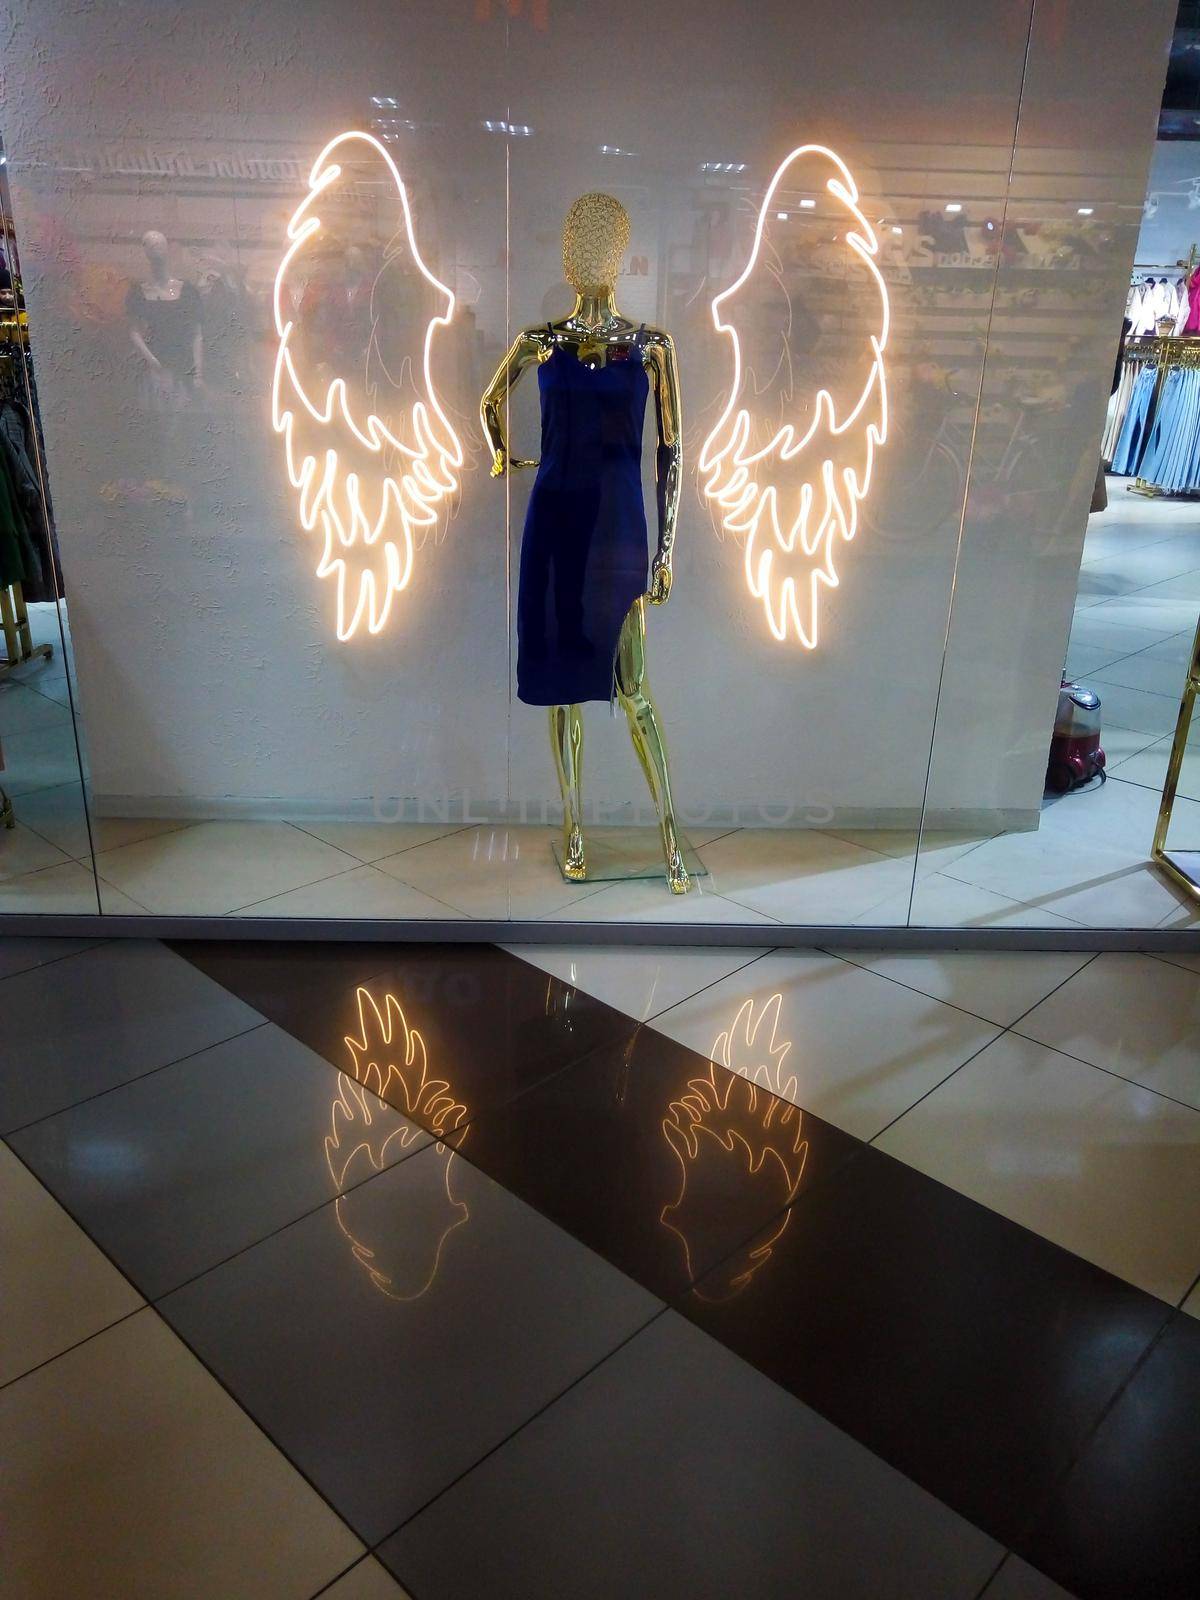 Shop window with angel mannequin, beautiful shopping center design.